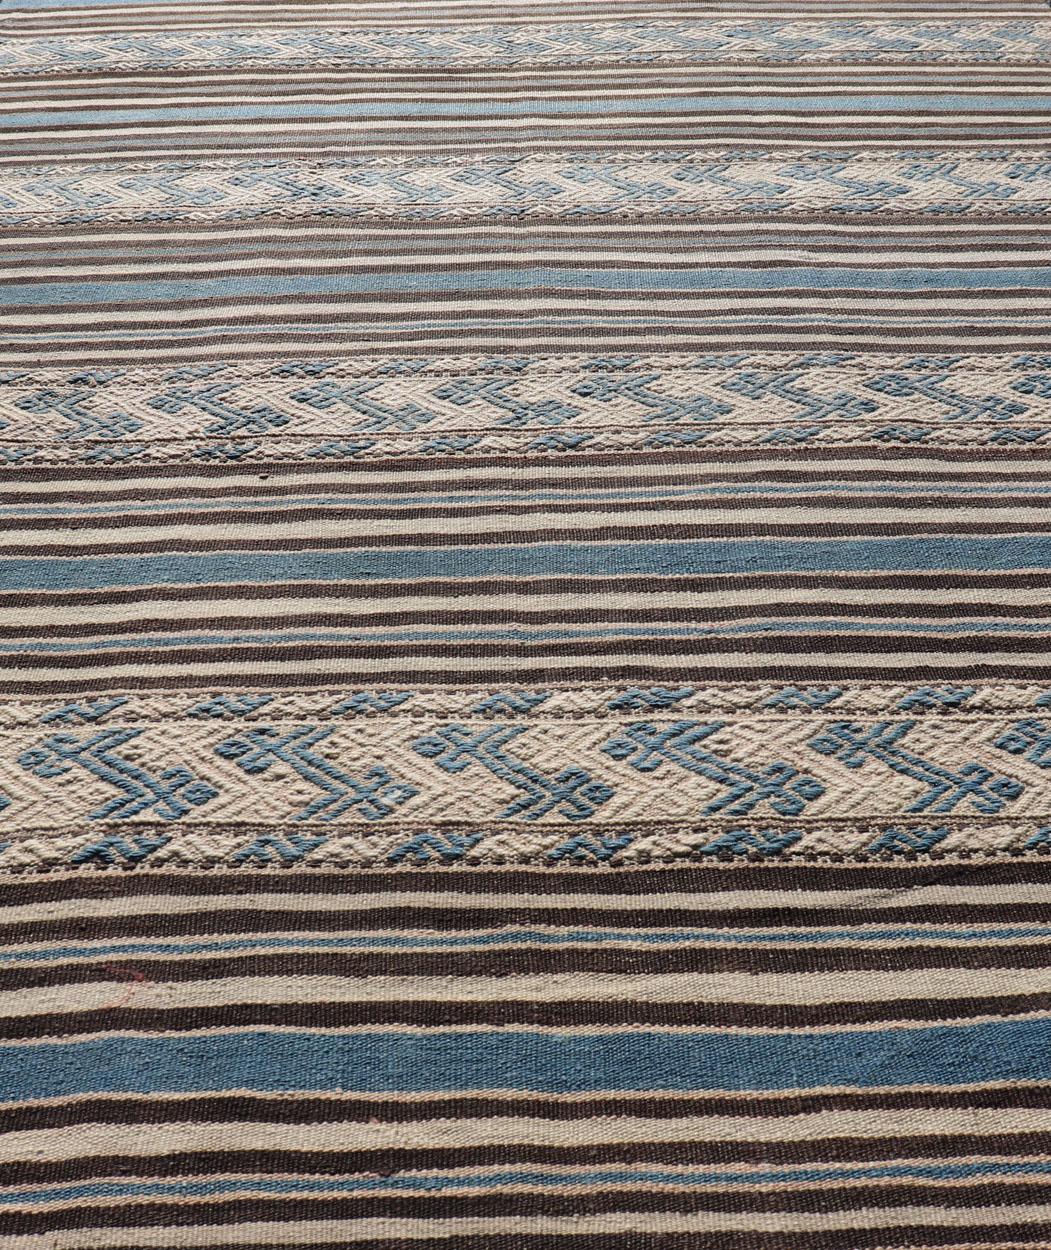 Turkish Vintage Flat-Weave with Striped Design and Tribal Motifs in Blue & Brown For Sale 1